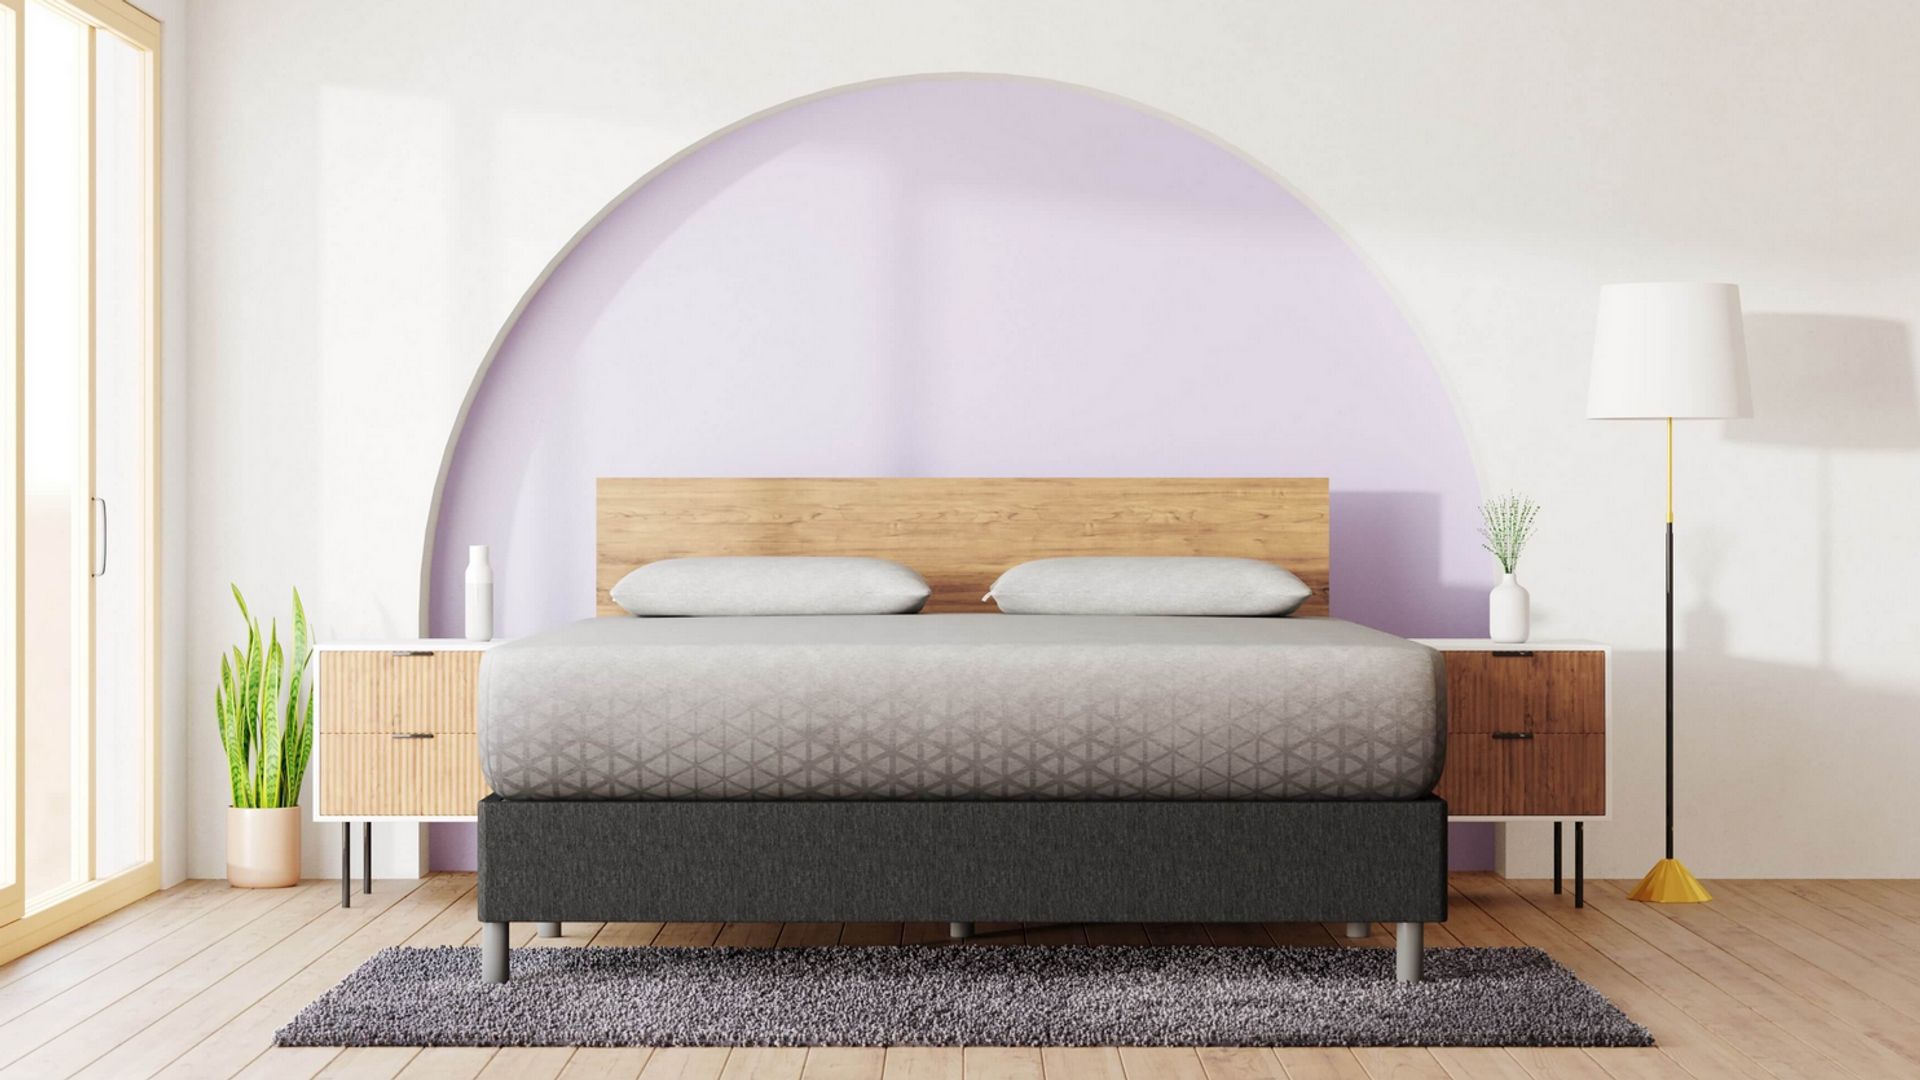 7 best hybrid mattresses to shop for an amazing night's sleep